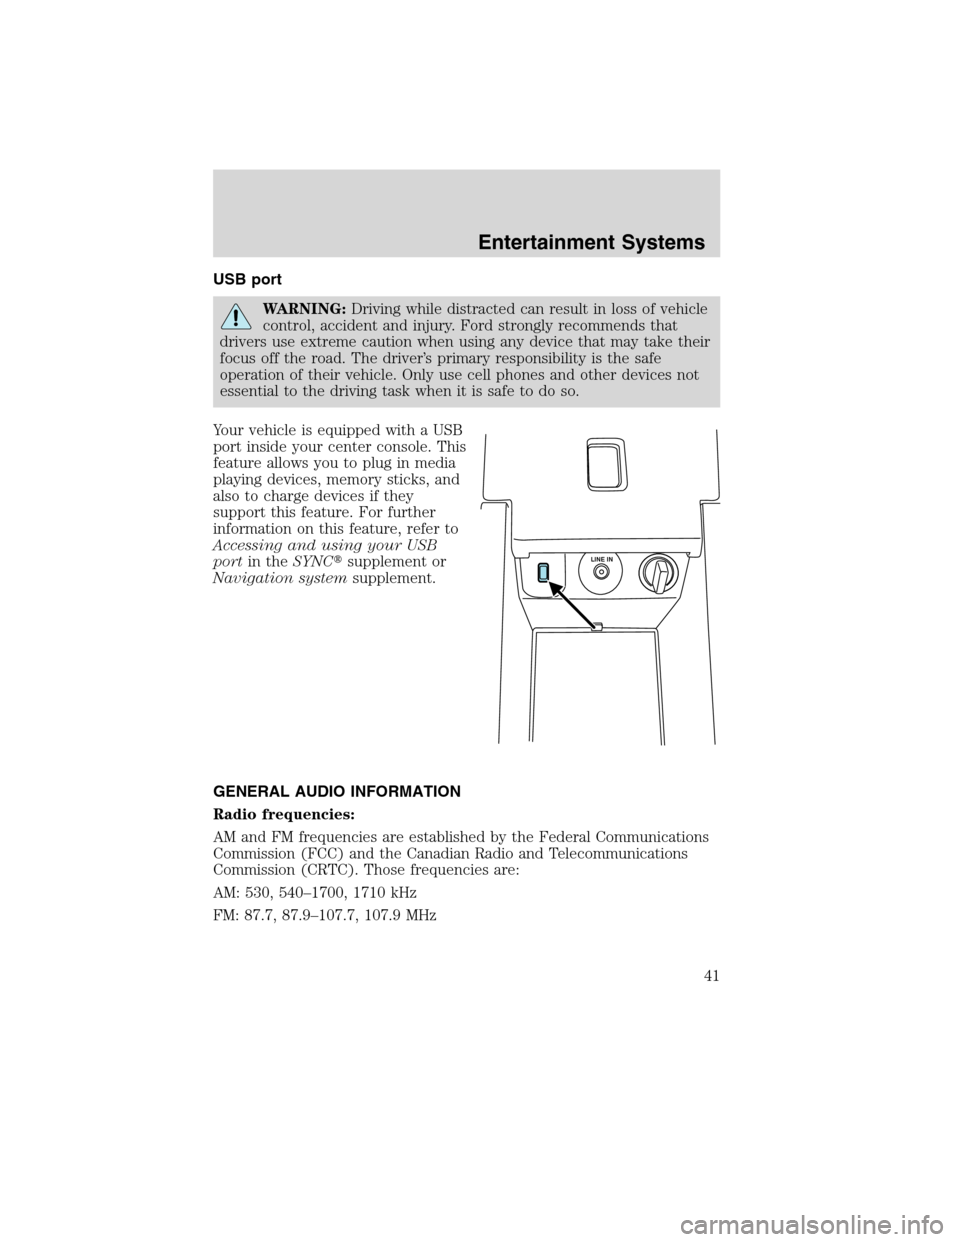 LINCOLN MKS 2010 User Guide USB port
WARNING:Driving while distracted can result in loss of vehicle
control, accident and injury. Ford strongly recommends that
drivers use extreme caution when using any device that may take thei